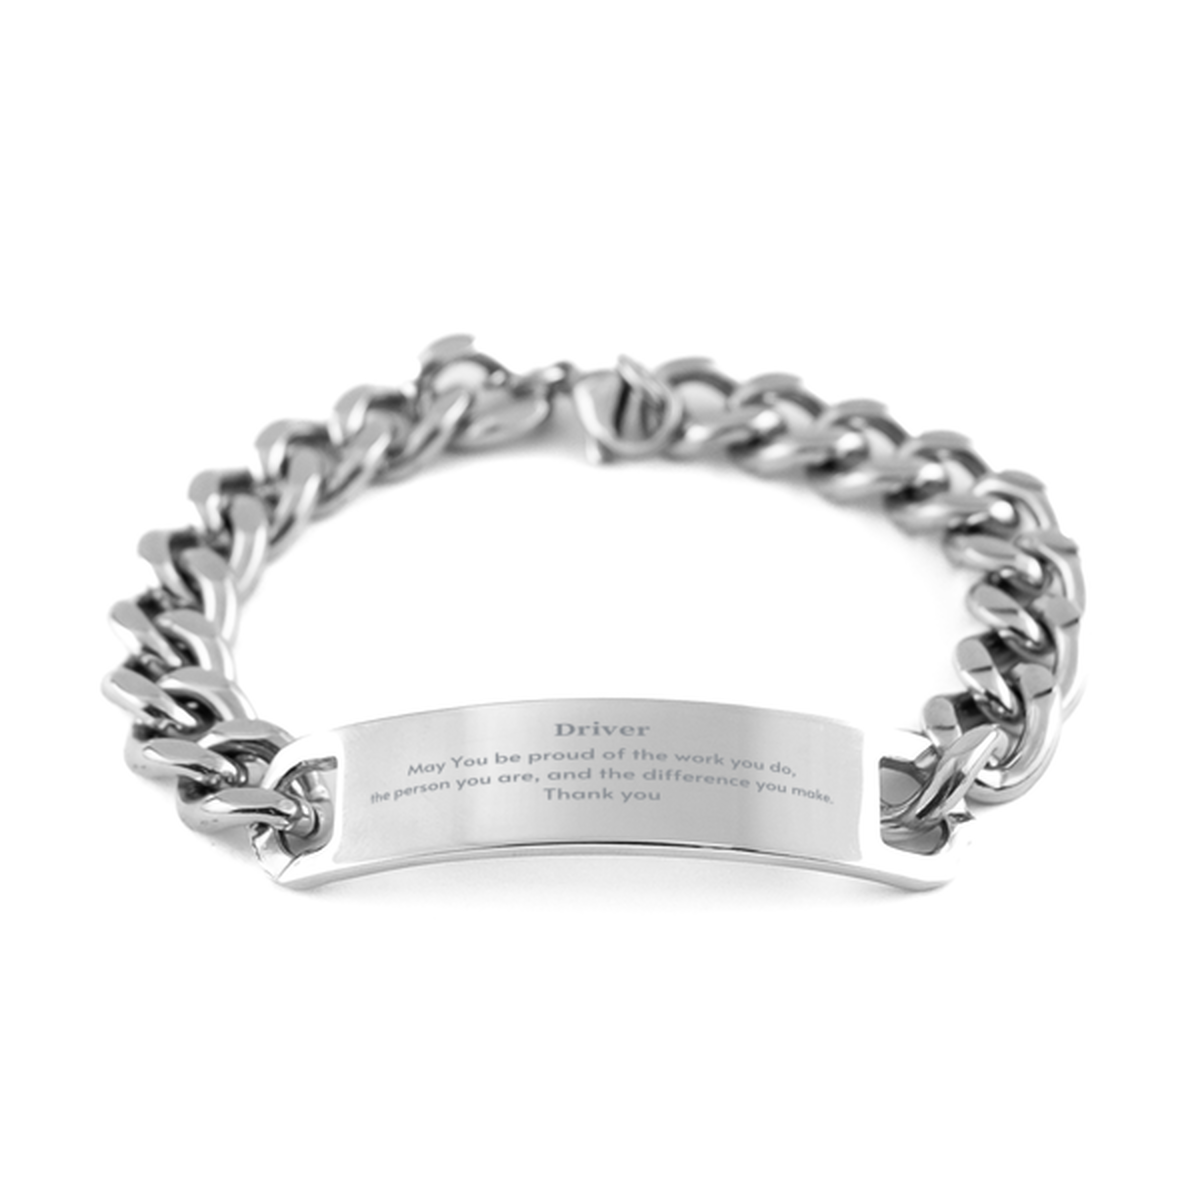 Heartwarming Cuban Chain Stainless Steel Bracelet Retirement Coworkers Gifts for Driver, Driver May You be proud of the work you do, the person you are Gifts for Boss Men Women Friends